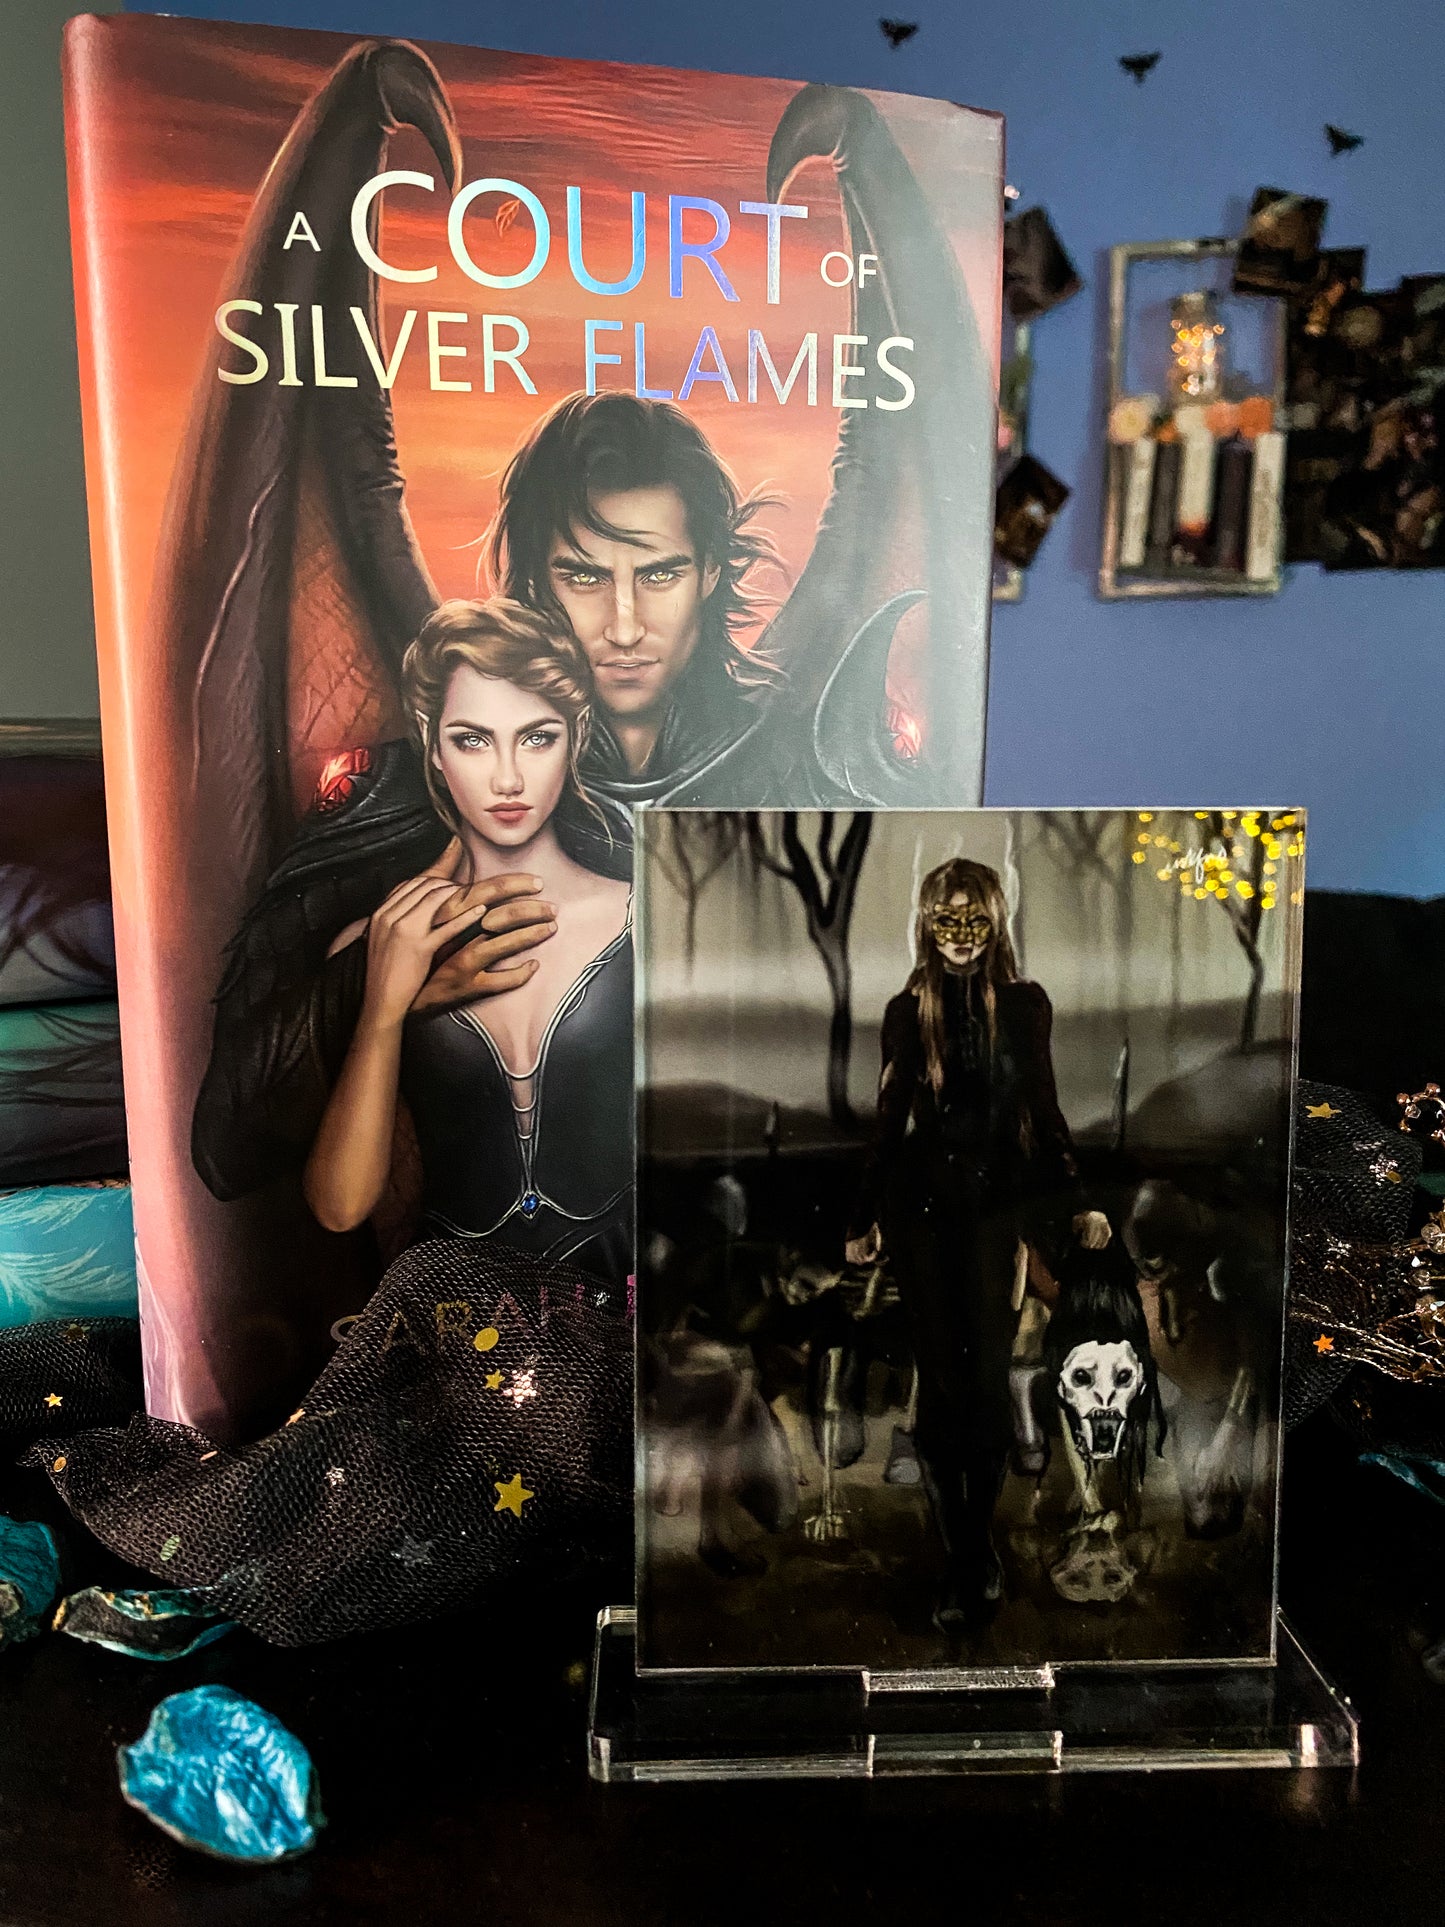 Silver Flames - Fan Art from @InkFaeArt - Freestanding Bookshelf / Desktop Acrylic Accessory - Officially licensed by Sarah J. Maas - FA12